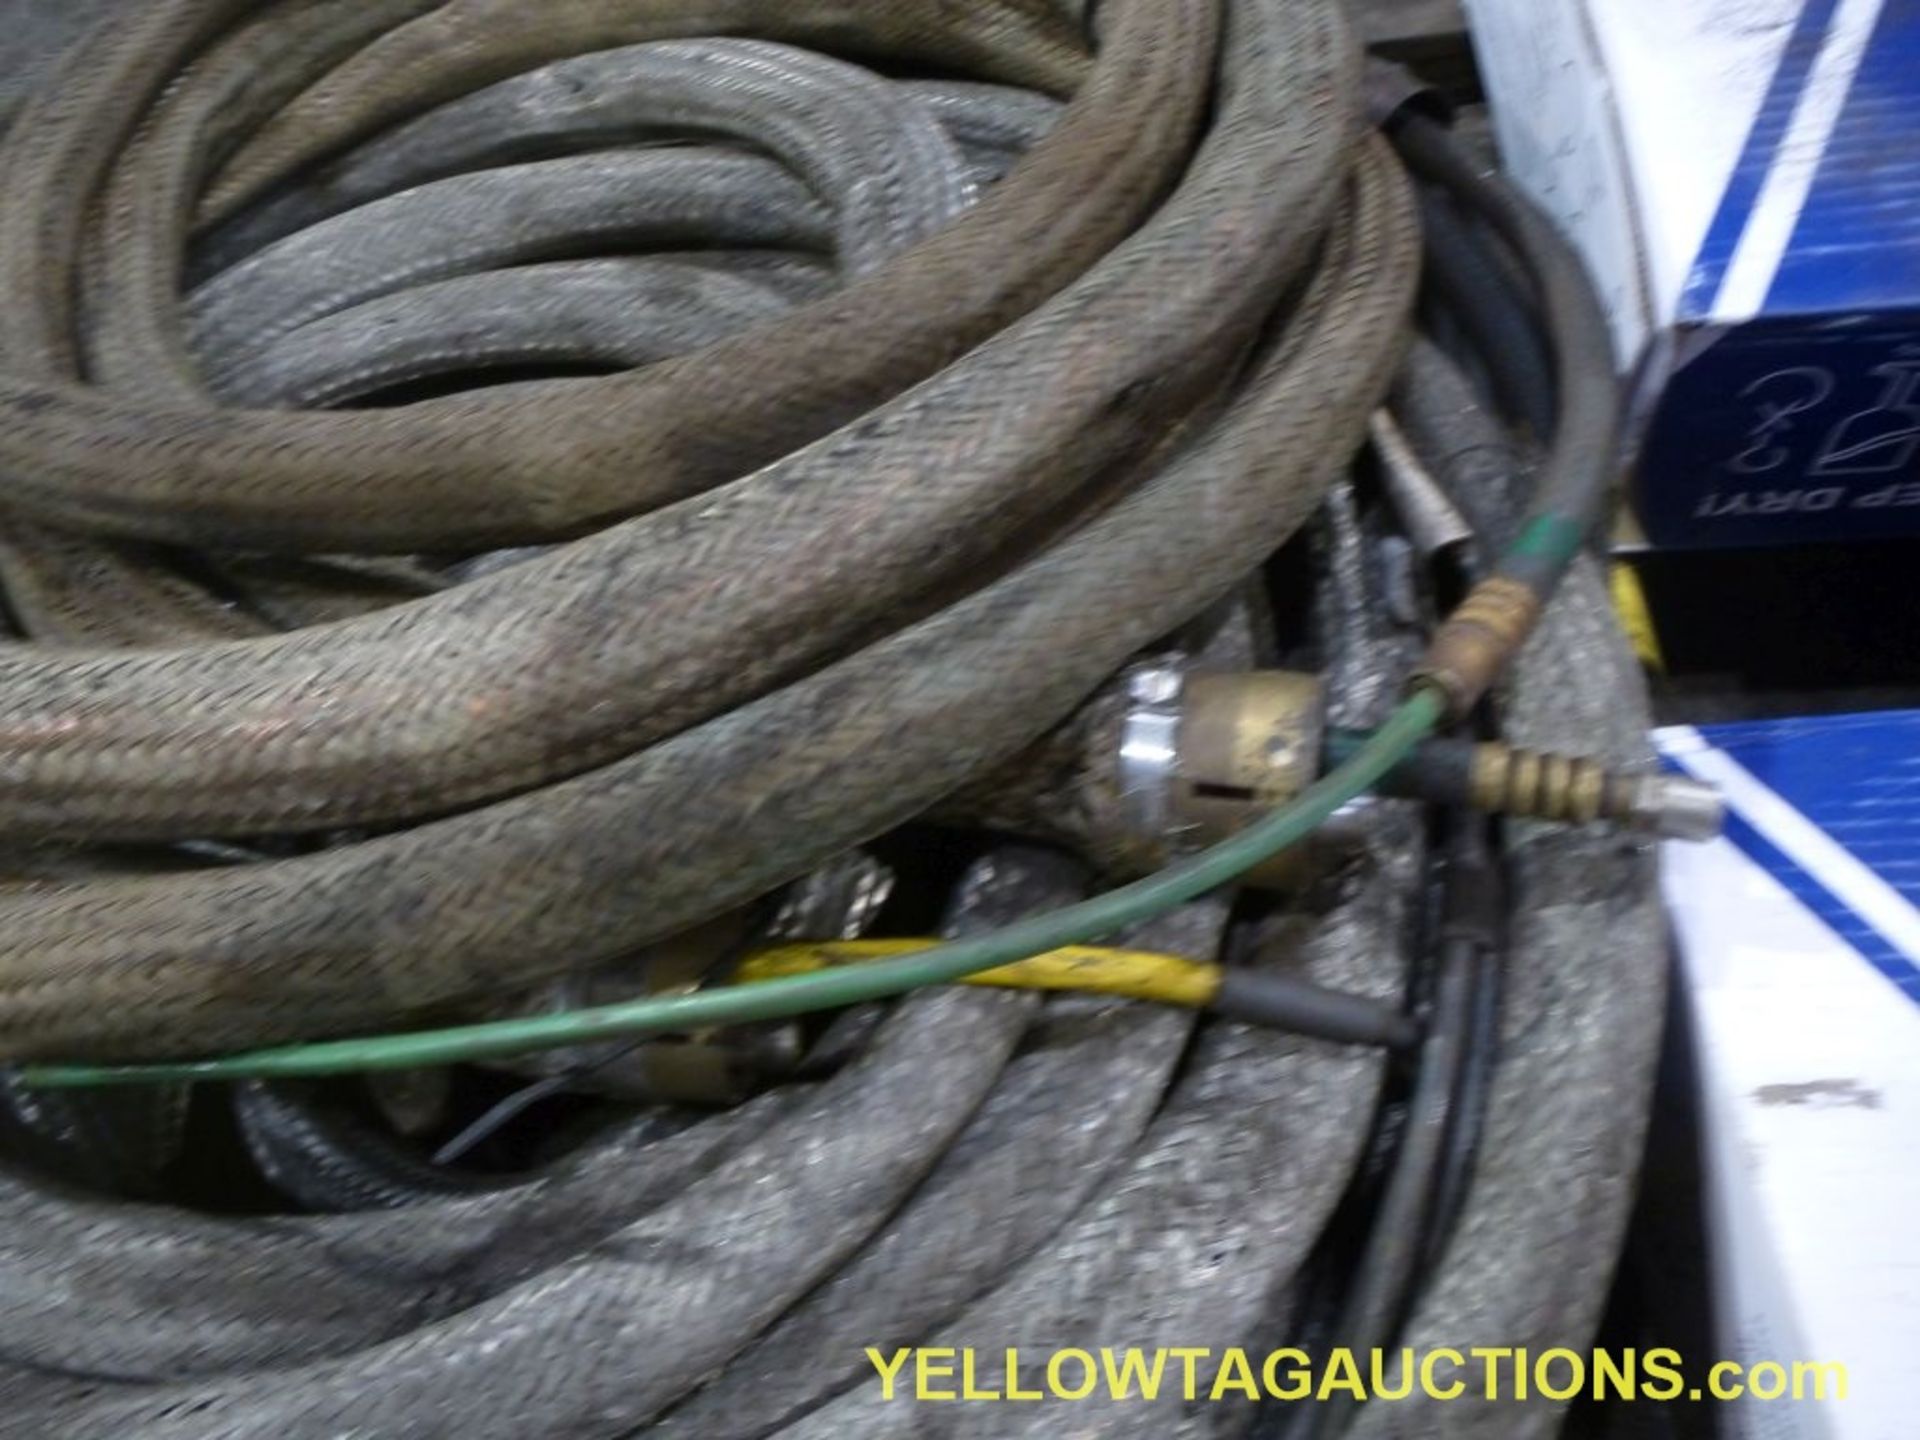 Lot of Assorted Wire and Hose|(2) Boxes of Solid Steel Wires, Gas Metal Arc Welding Wire, Size 0. - Image 6 of 6